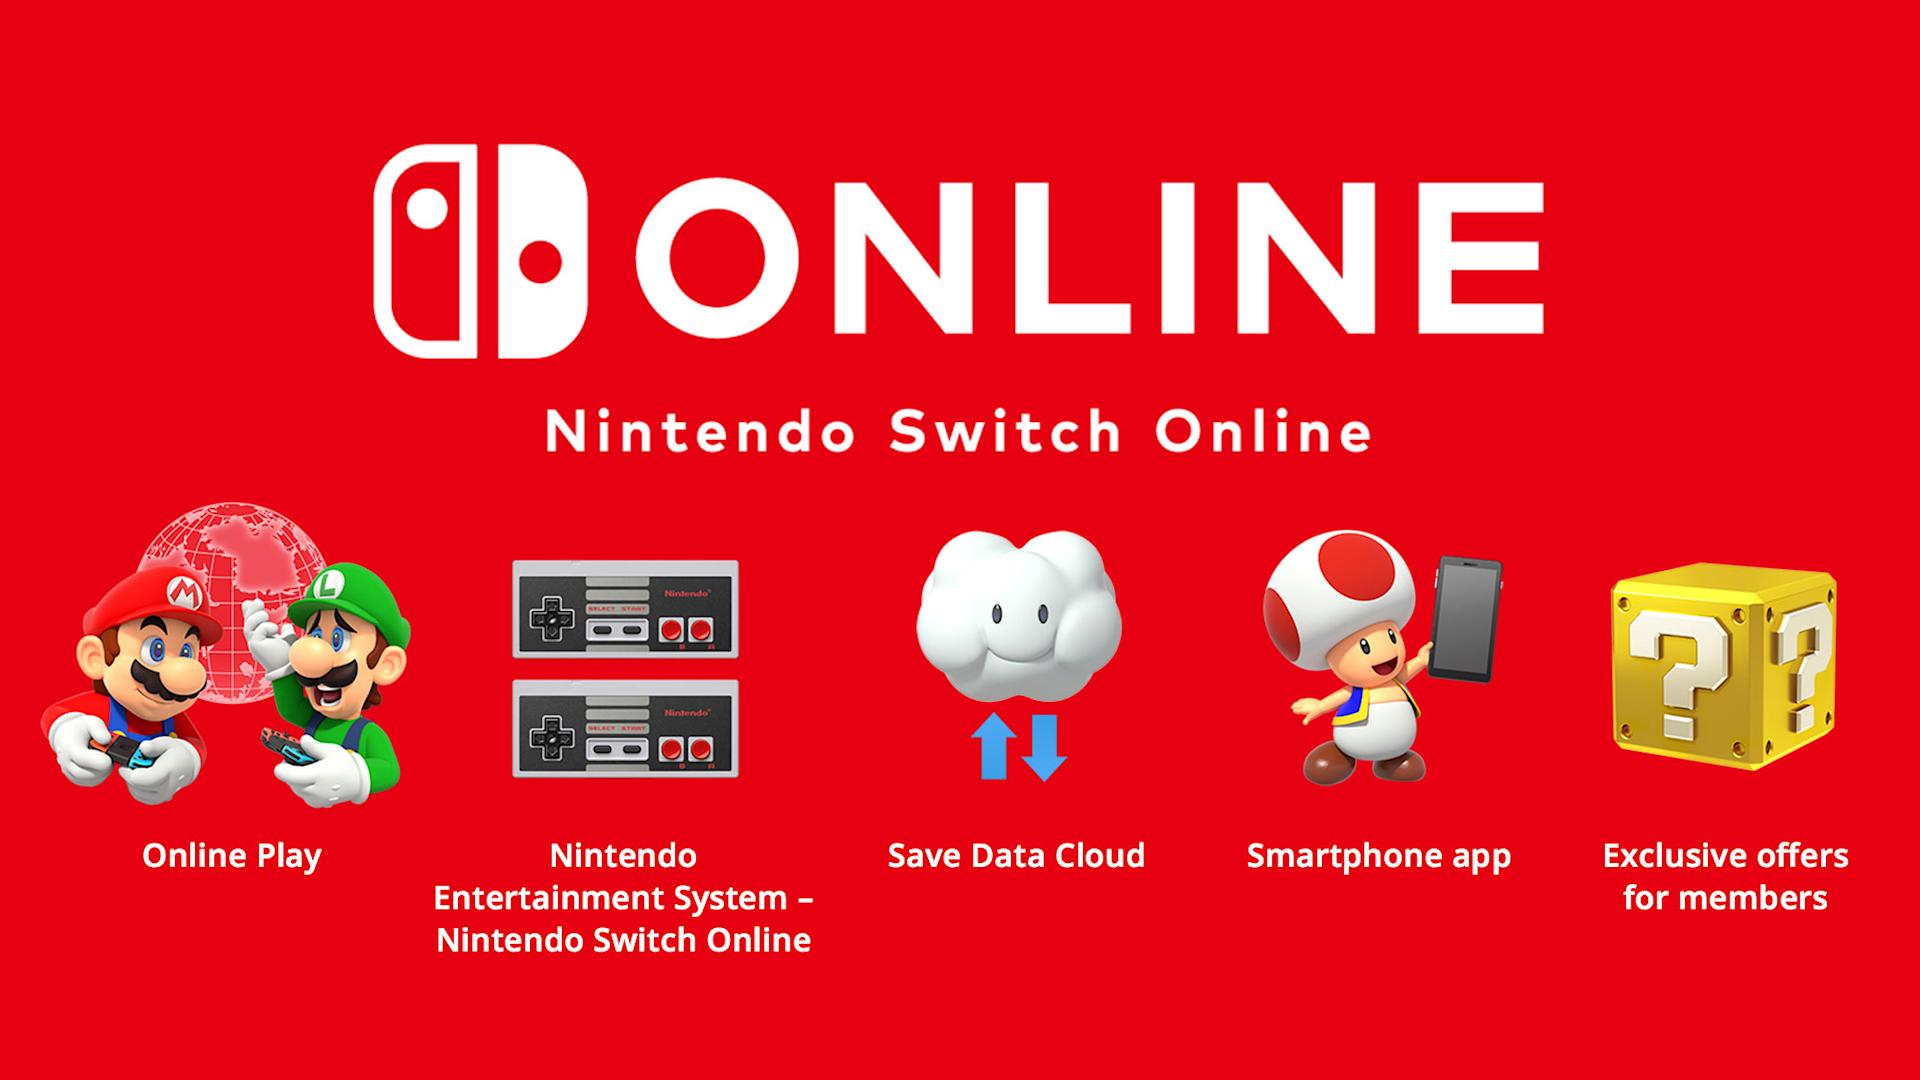 Play online multiplayer with Nintendo Switch Online Membership